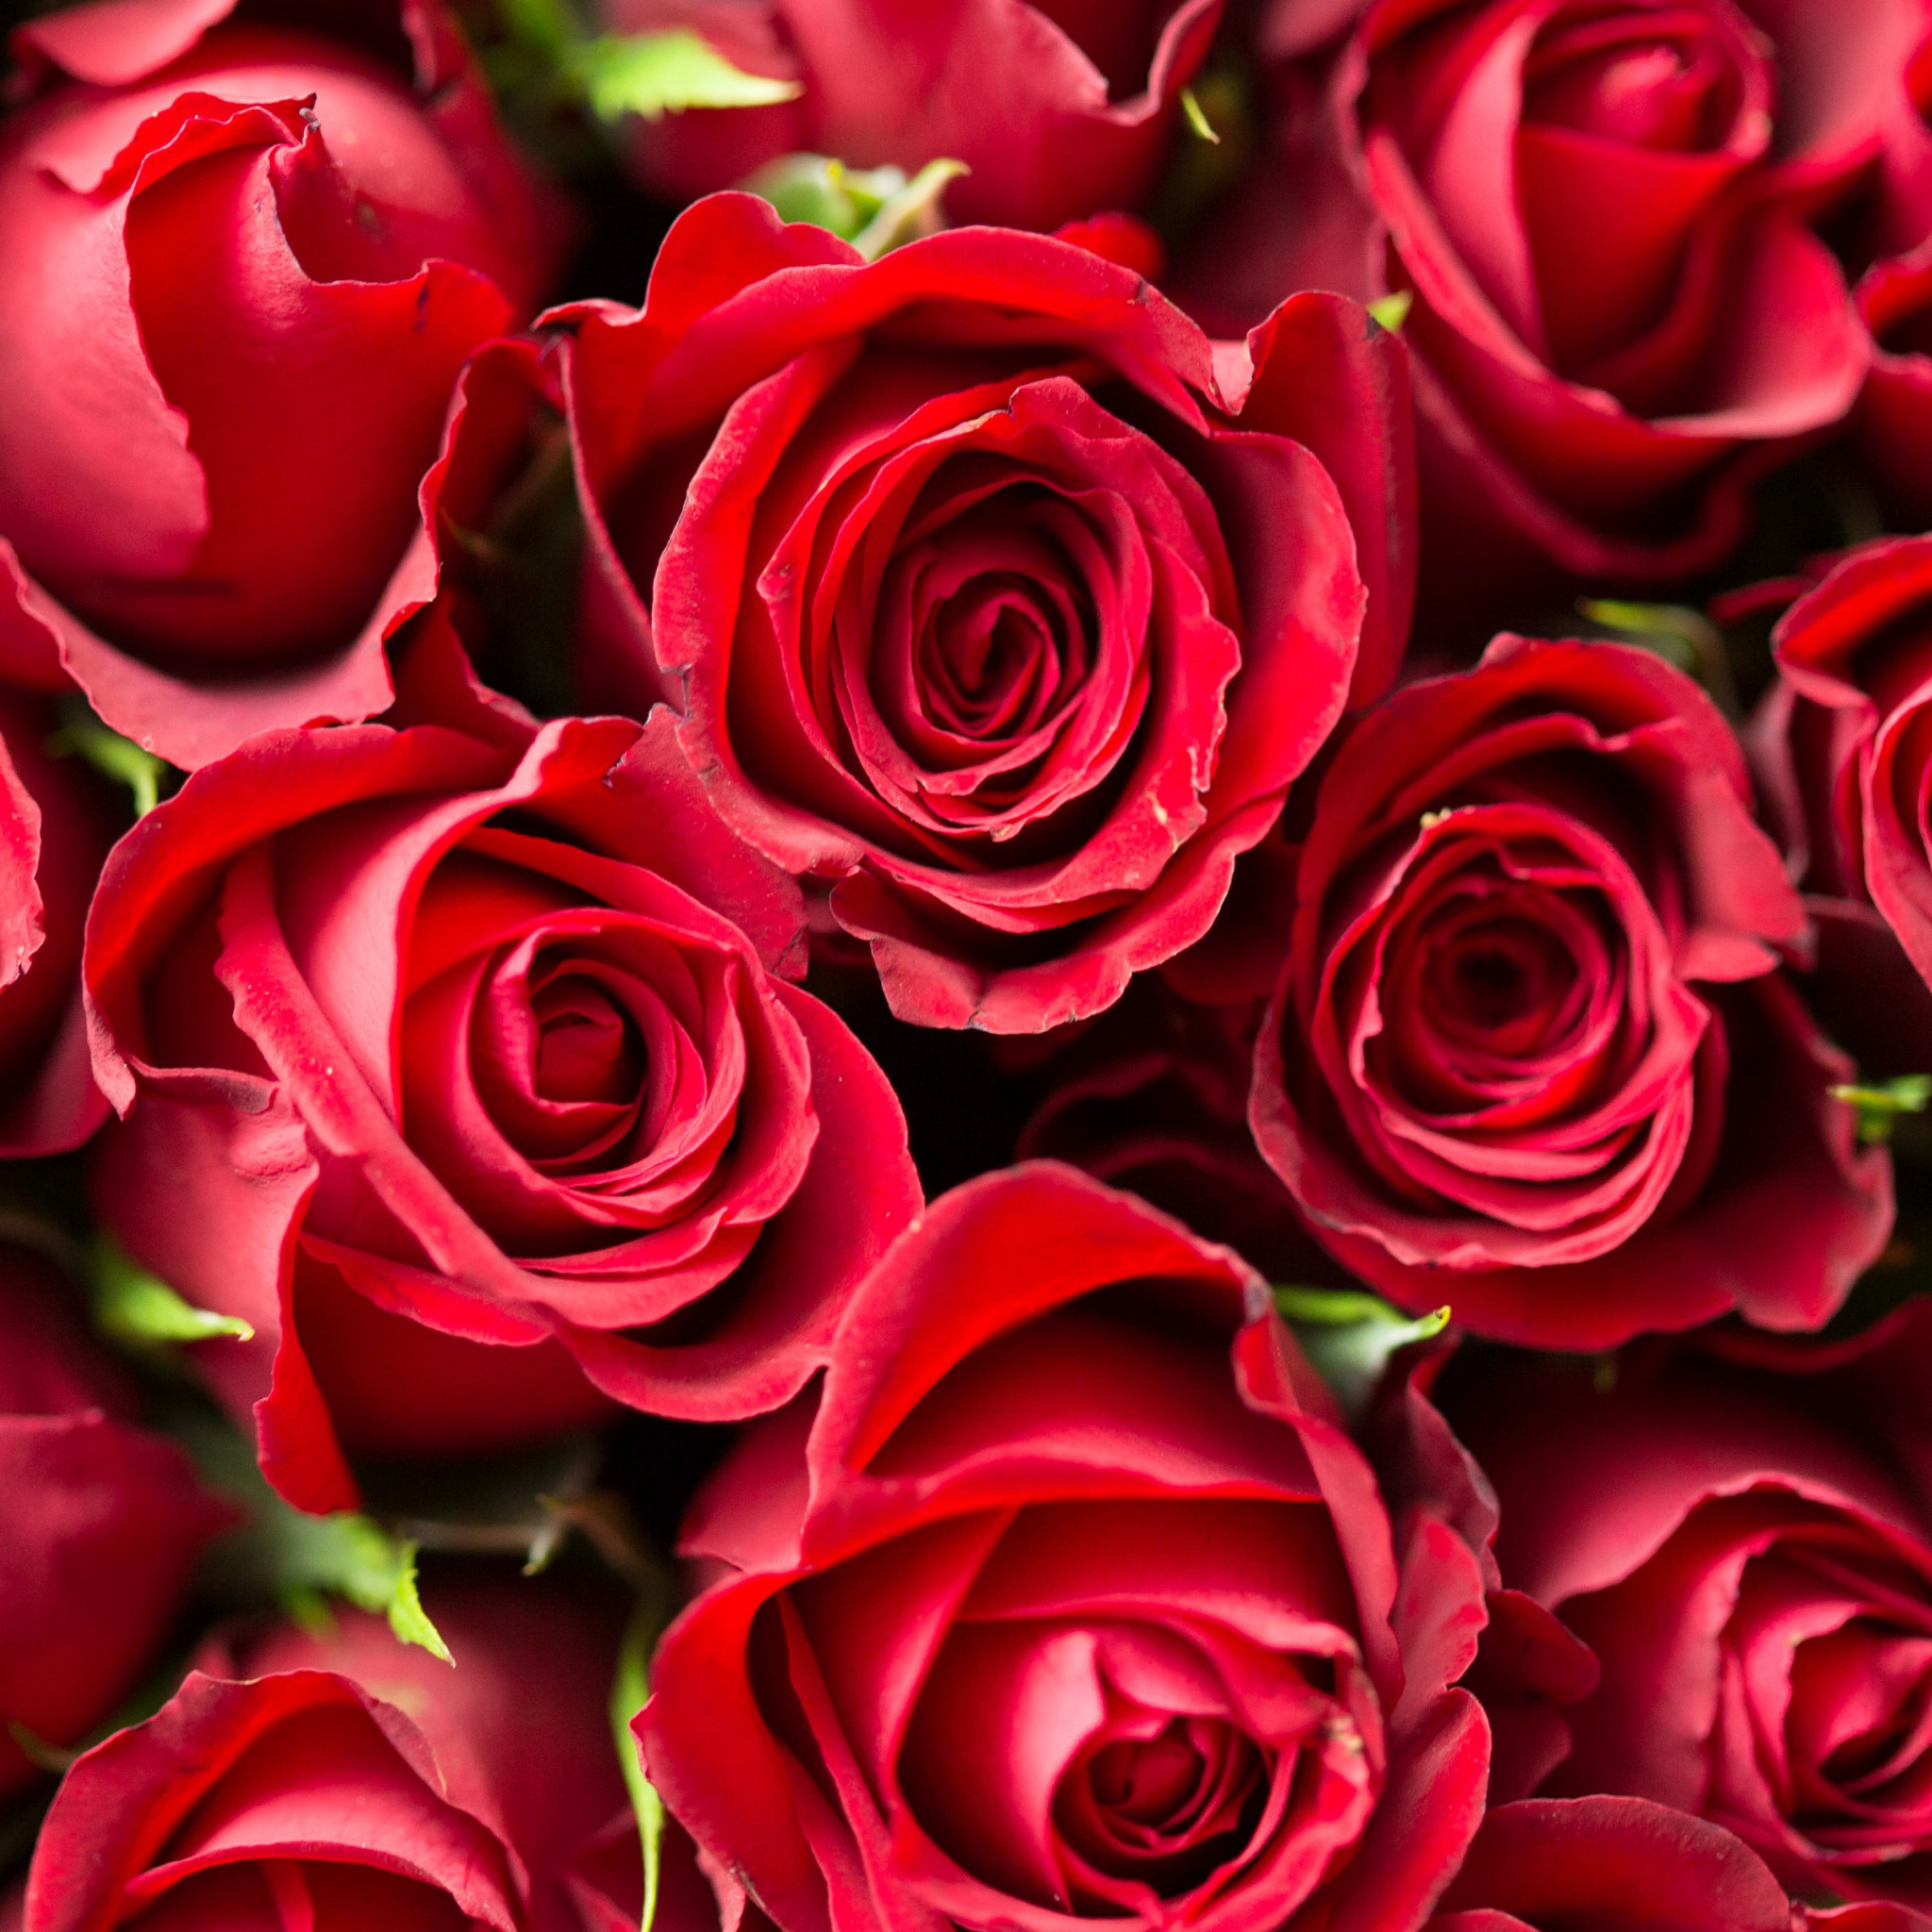 Lots of red roses wallpaper 2048x2048